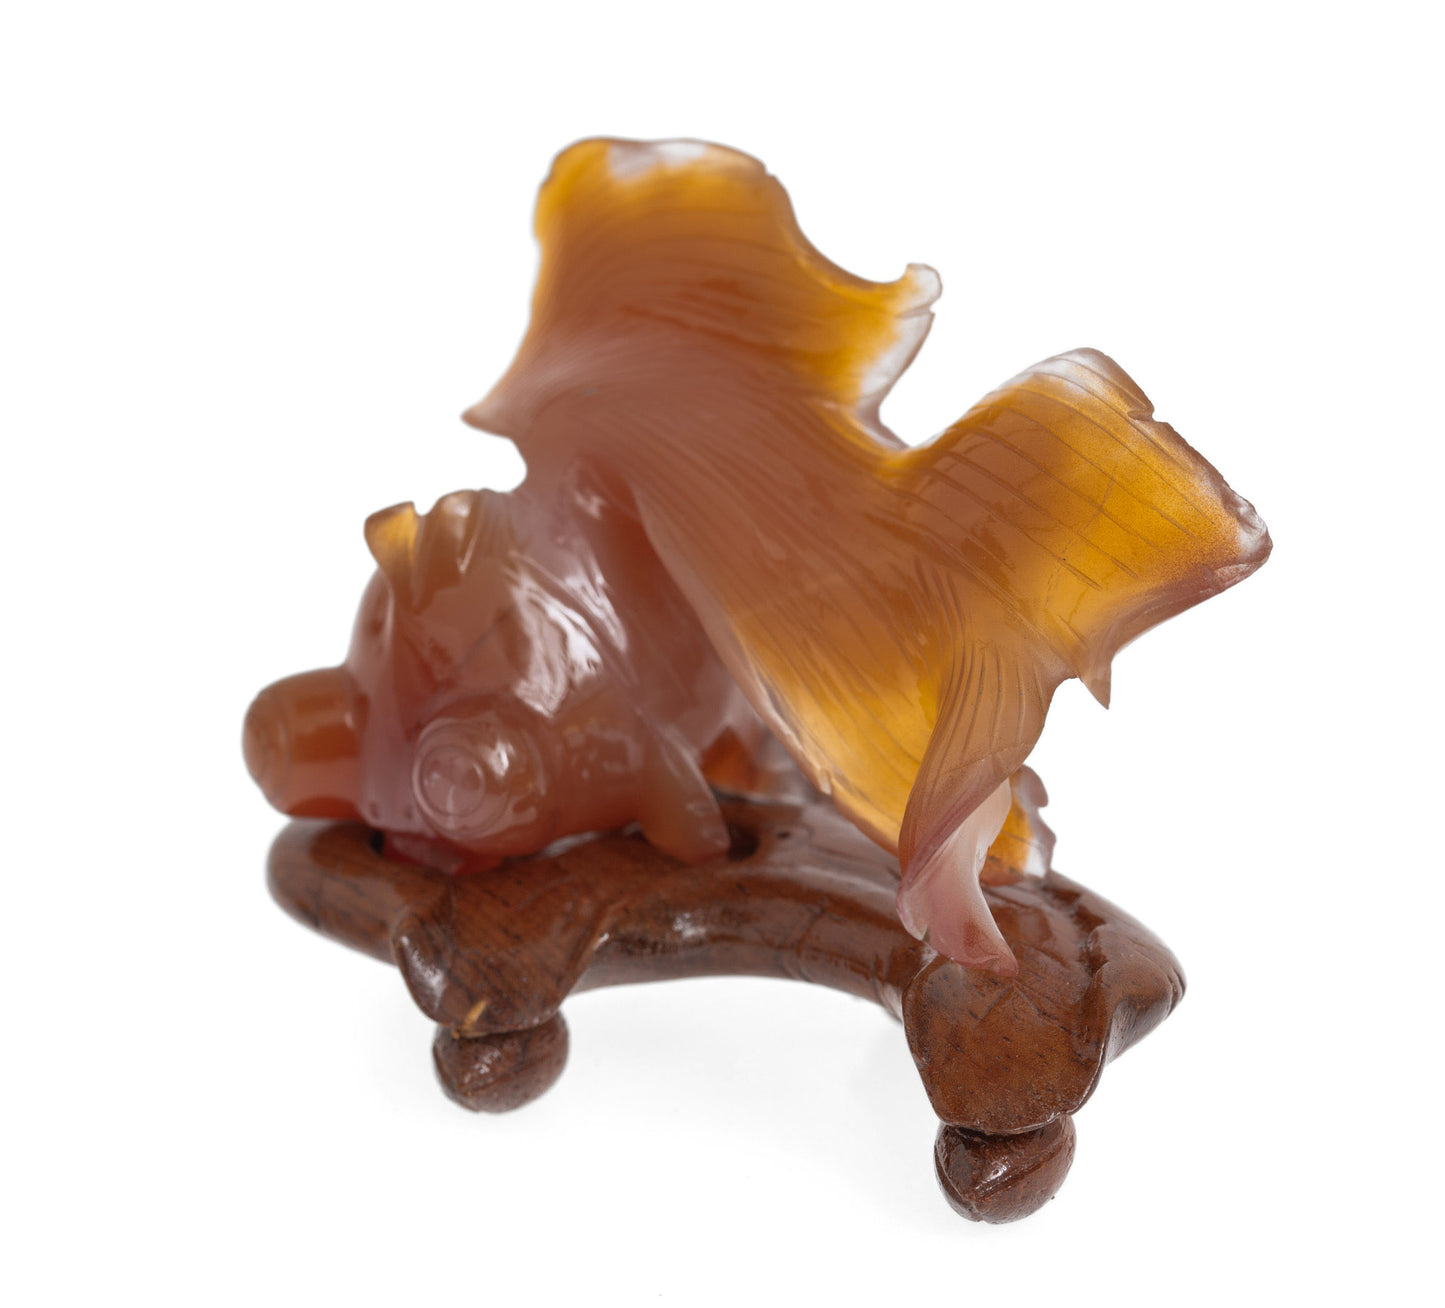 Vintage Chinese Carved Carnelian Model of a Shubunkin Goldfish with Stand (Code 2804)